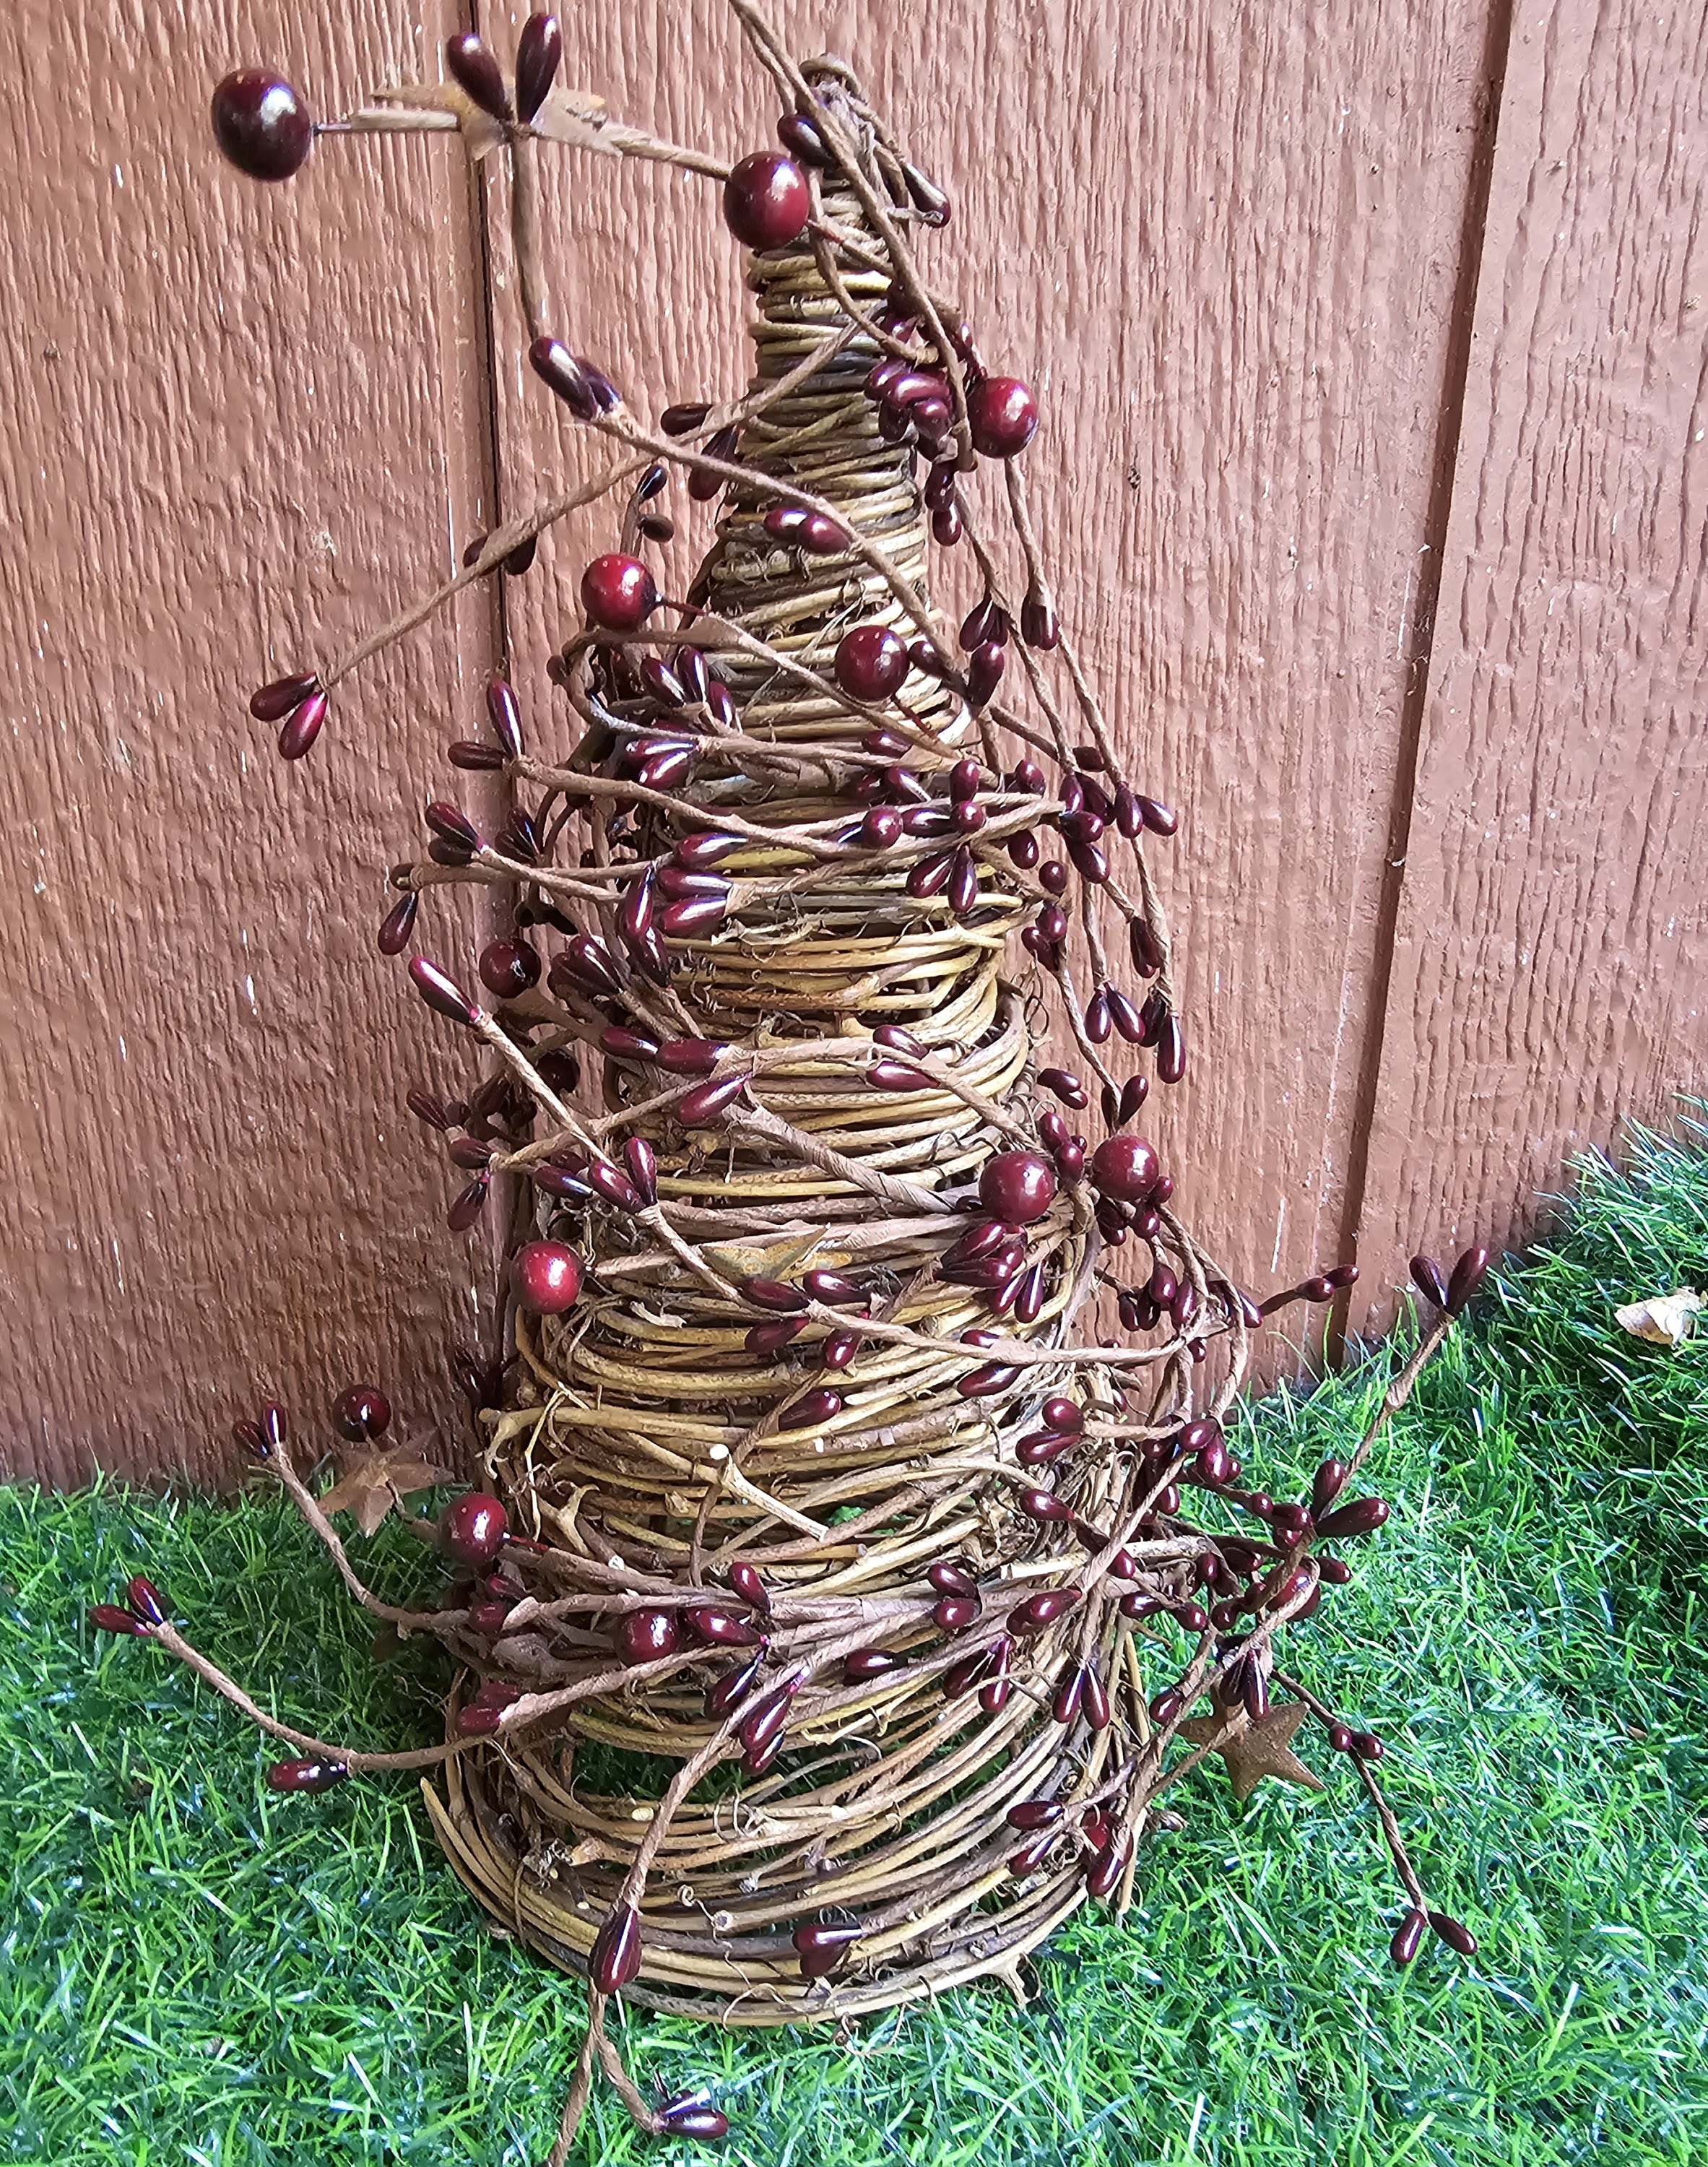 25 Foot Roll of Natural Dried Grapevine Garland